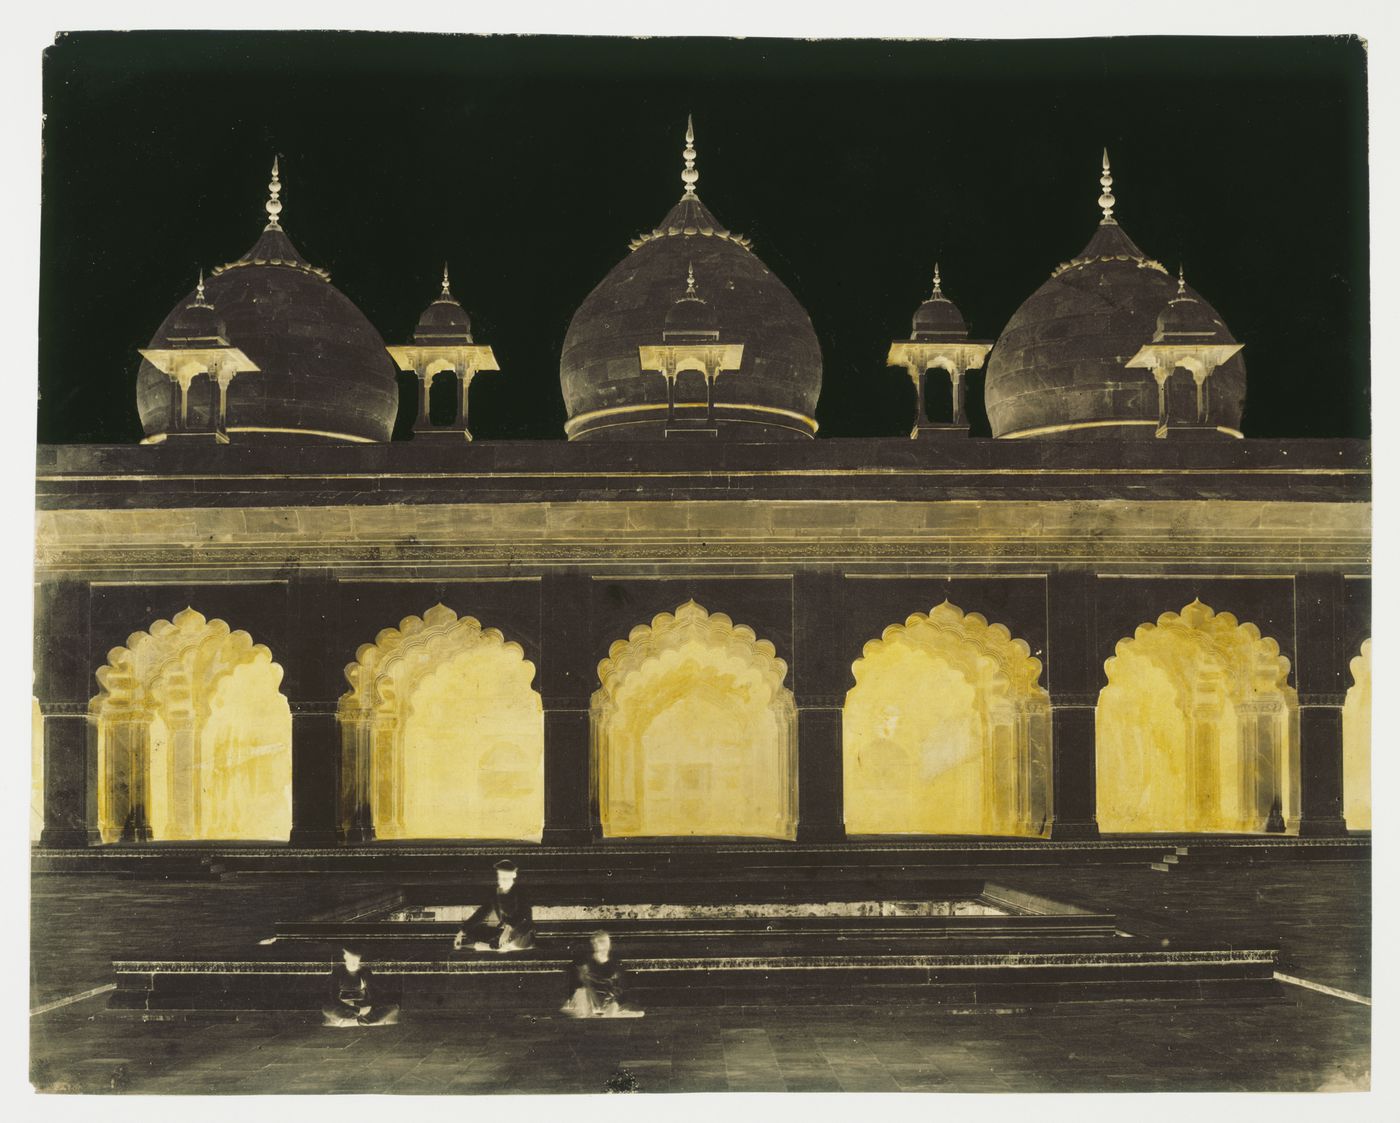 Central part of a panorama showing the Moti Masjid [Pearl Mosque] in the Agra Fort, India